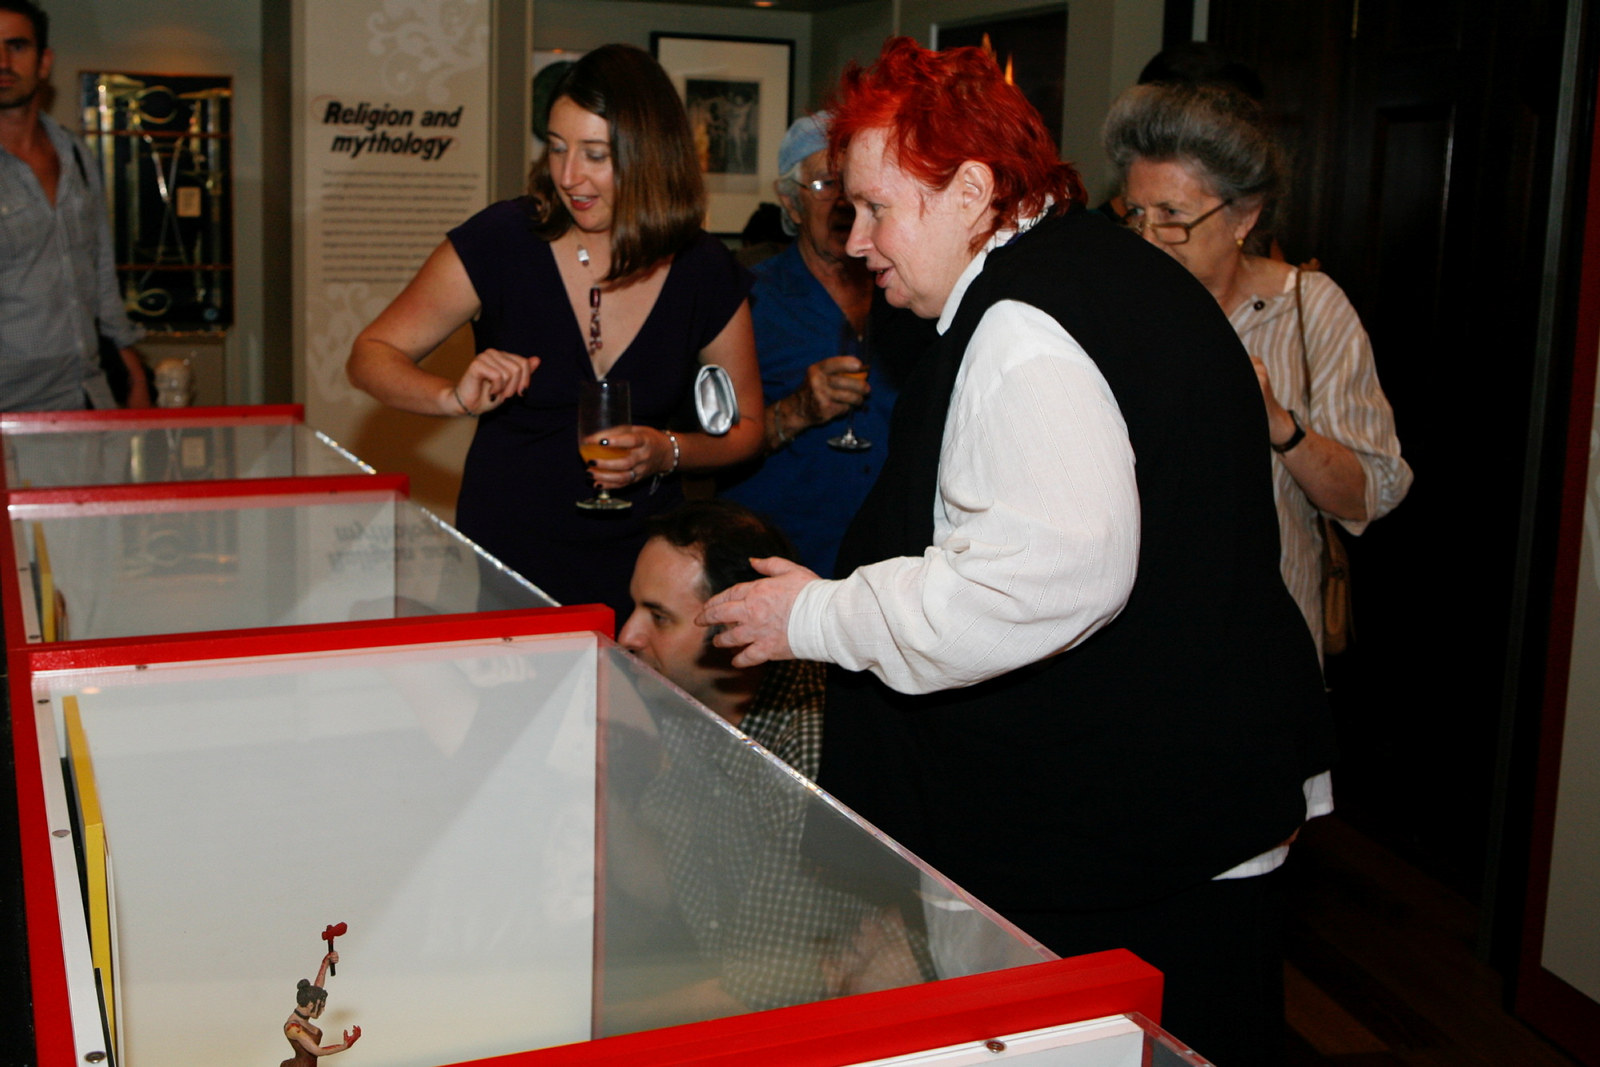 Visitors enjoy the Femme Fatale exhibition at the Justice & Police Museum